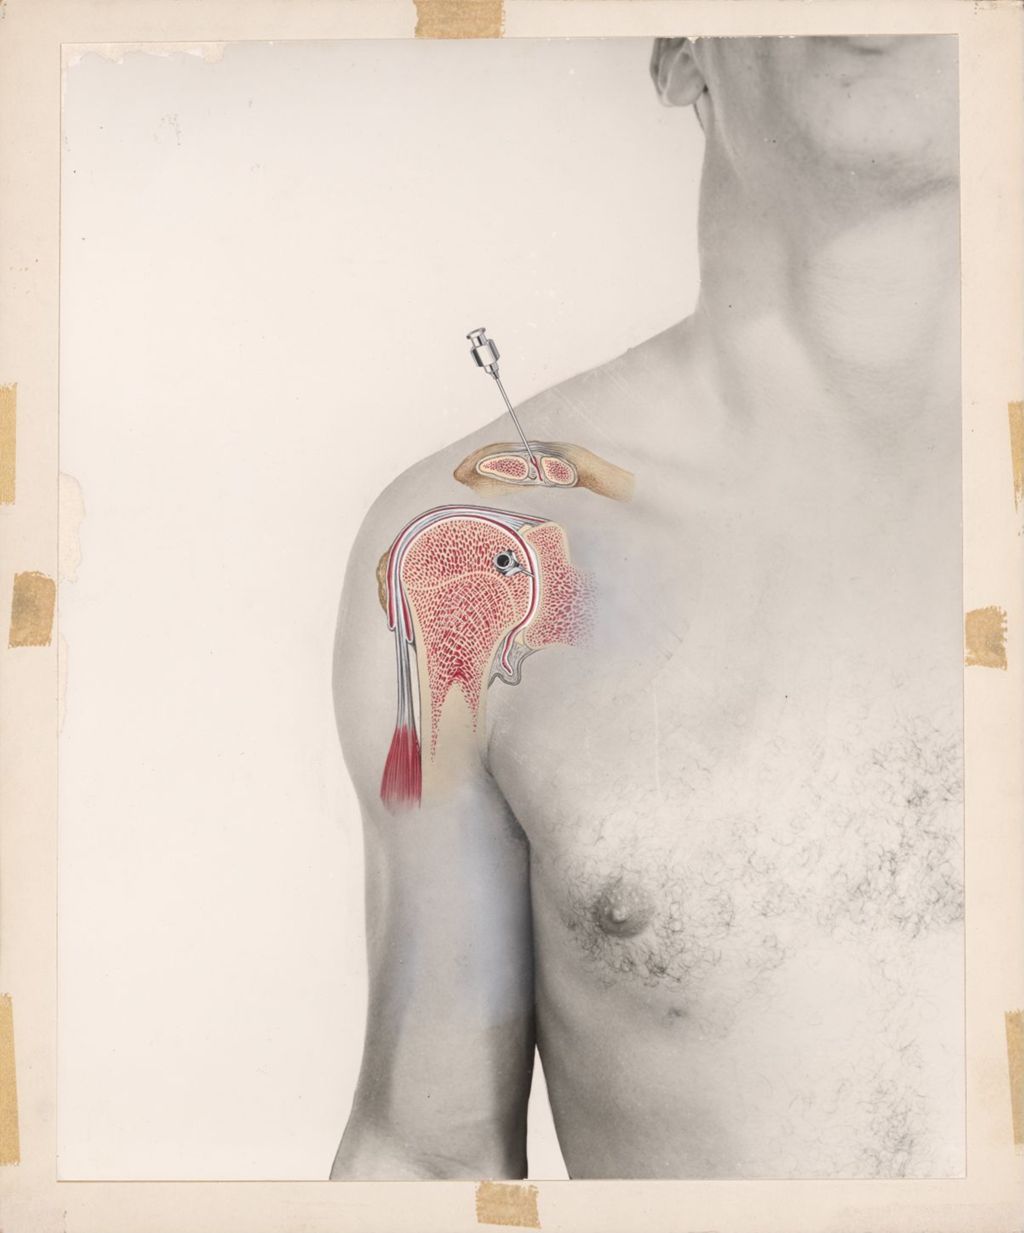 Miniature of Injection of Hydrocortone, Drawing on top of photograph of man's shoulder, showing needle insertion points